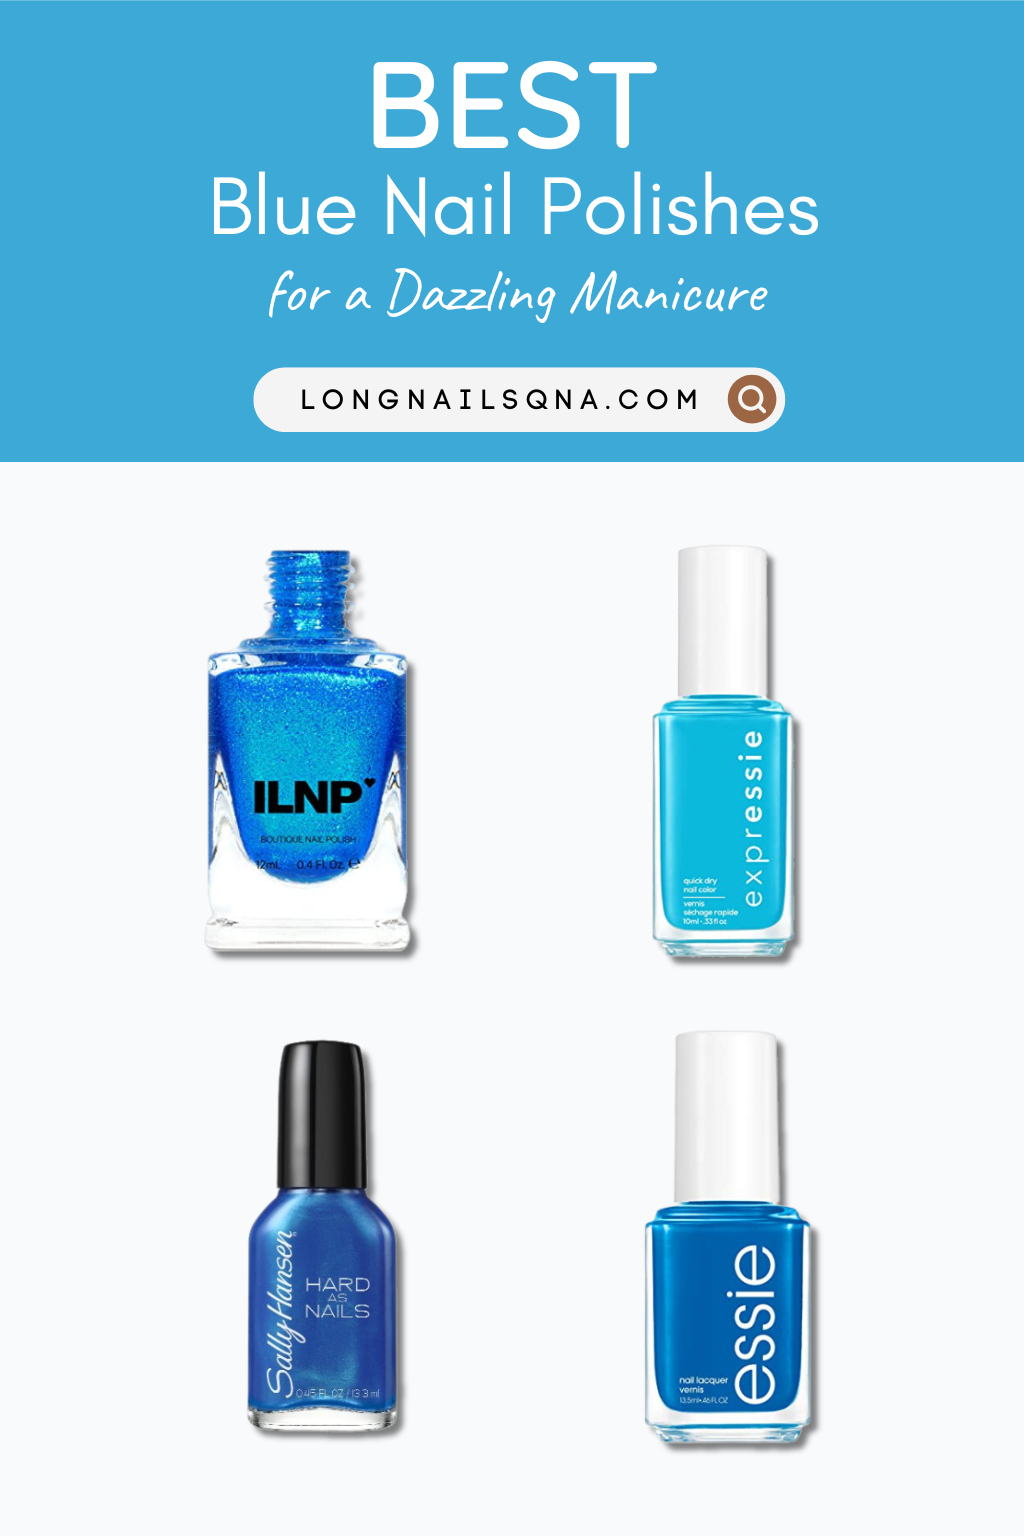 for a Dazzling Manicure